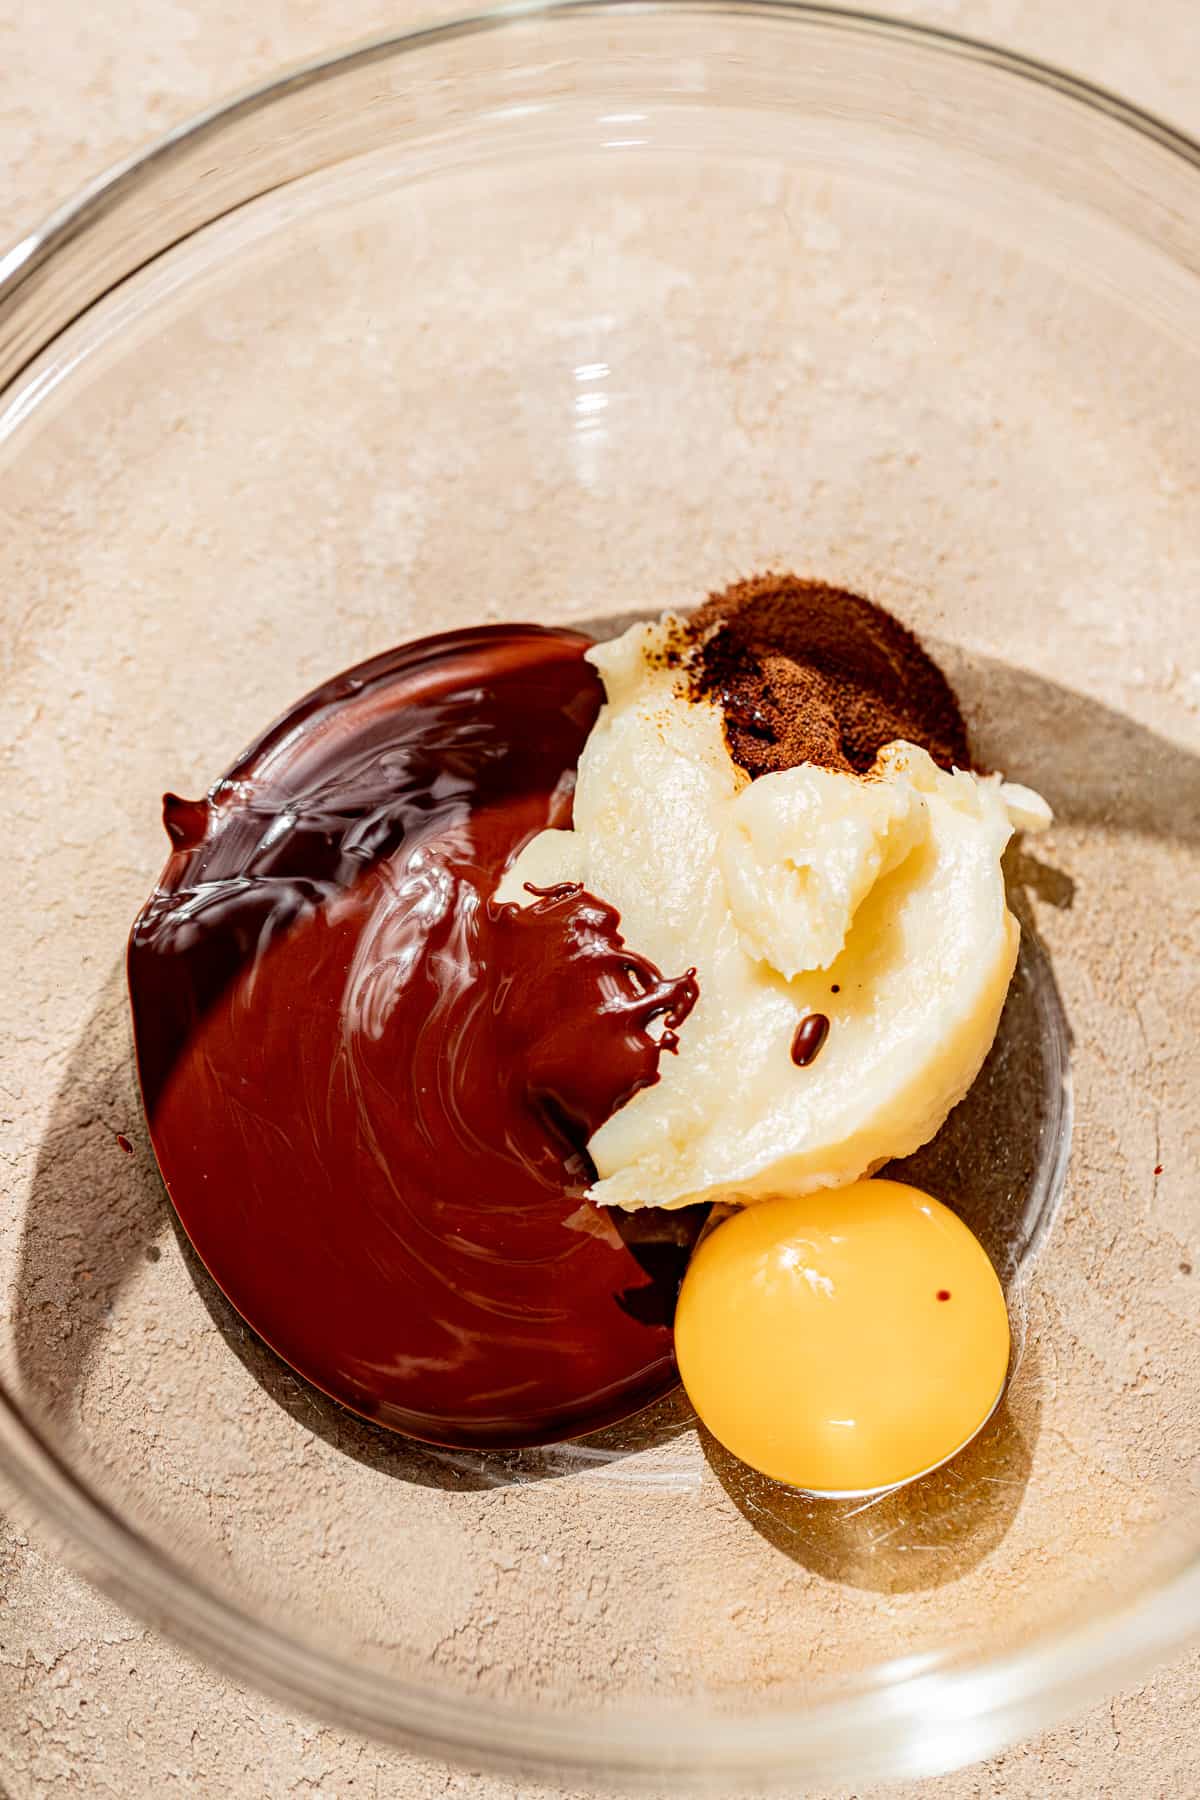 melted chocolate, egg yolk, and souffle base in bowl.